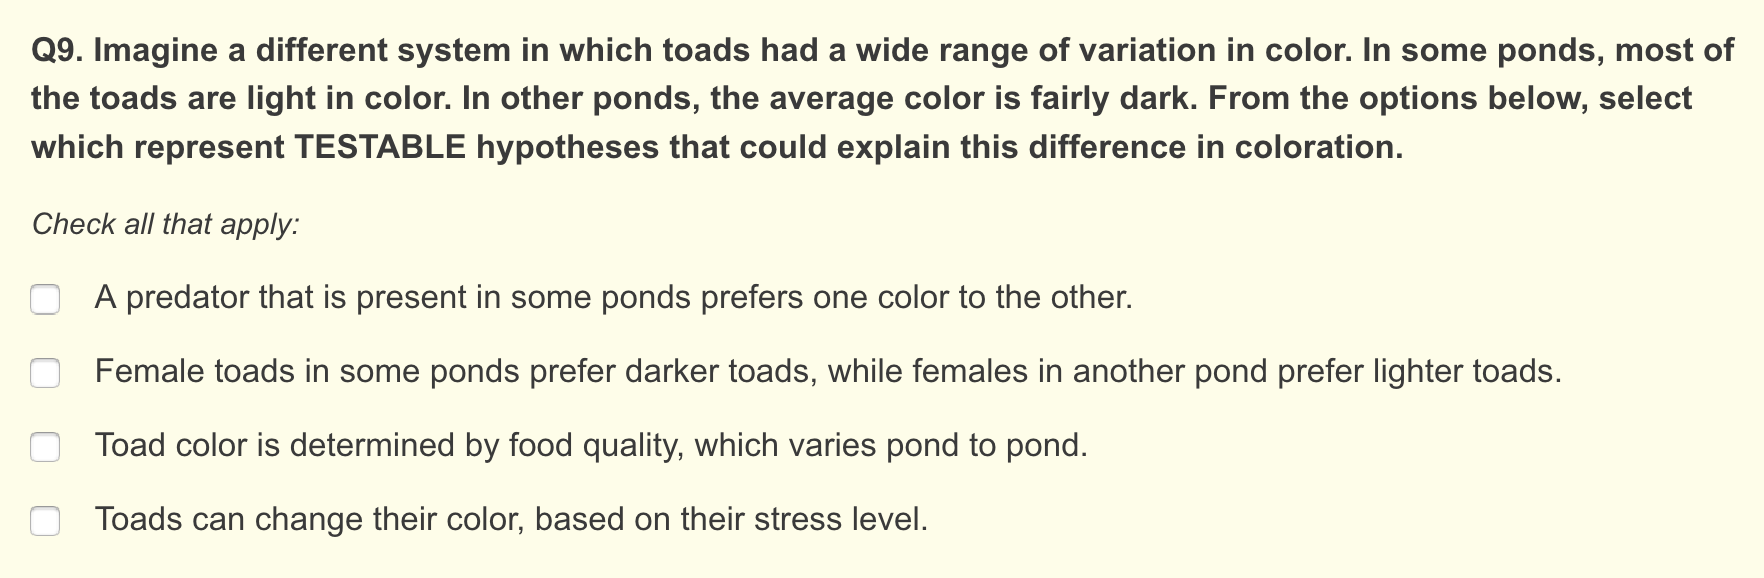 Imagine a different system in which toads had a wide range of variation in color. In some ponds,...